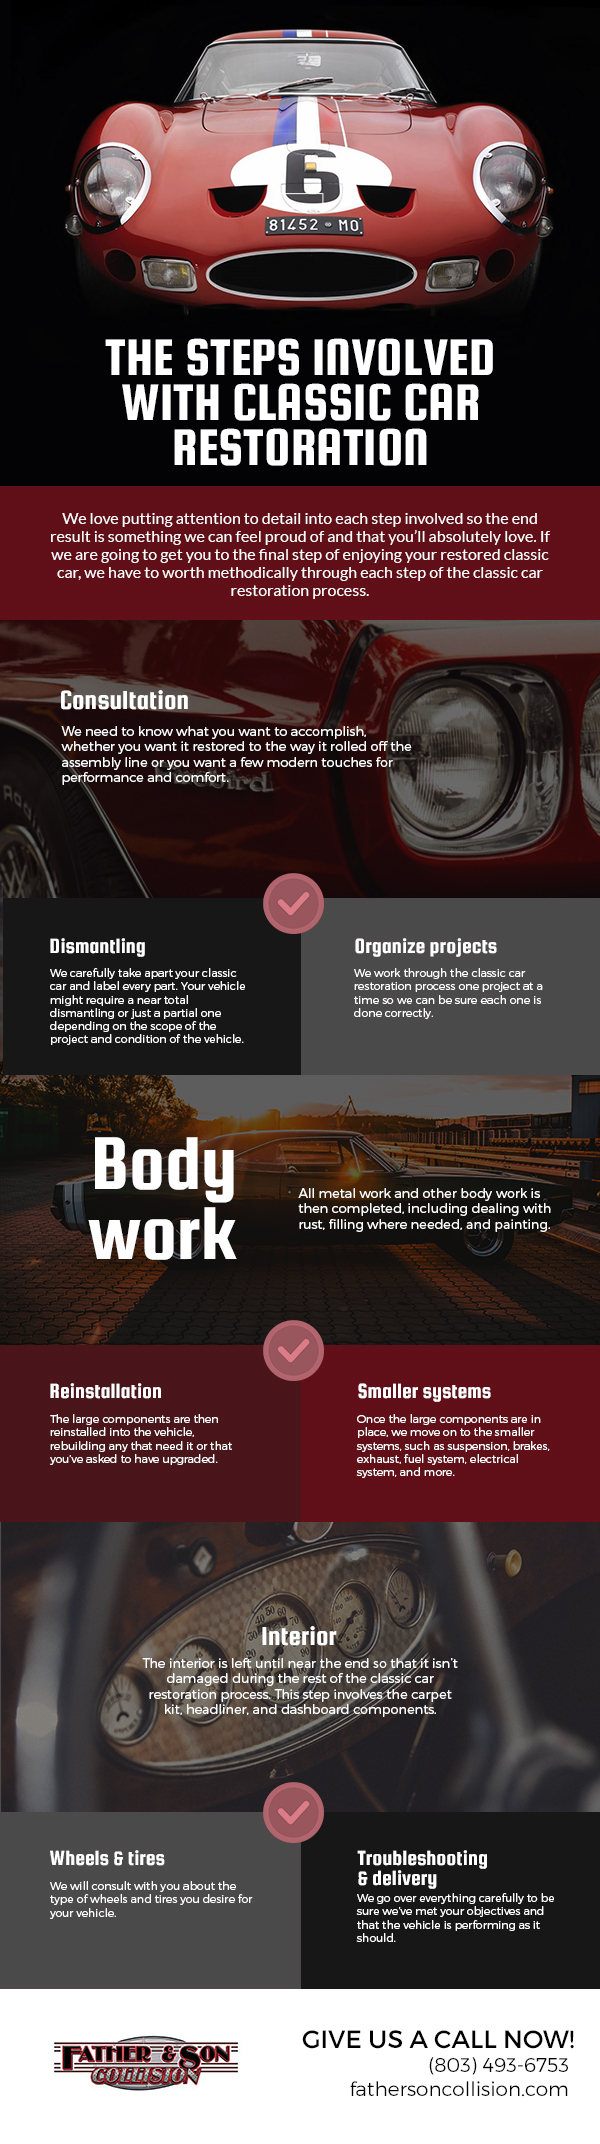 The steps involved with classic car restoration [infographic]